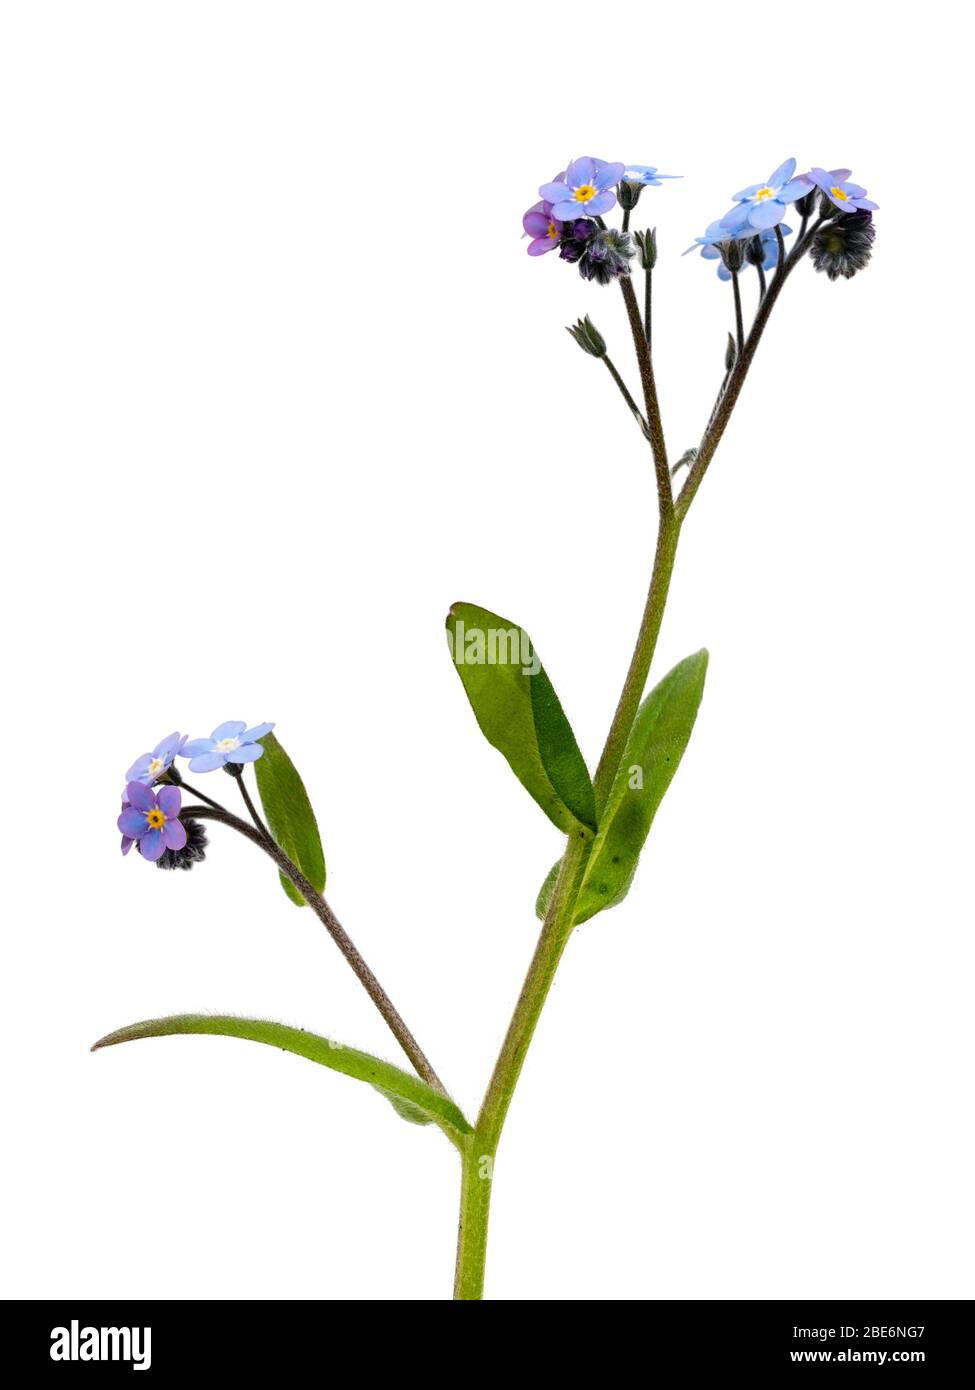 Single flowering stem of the wood forget me not, Myosotis sylvatica, on a white background Stock Photo